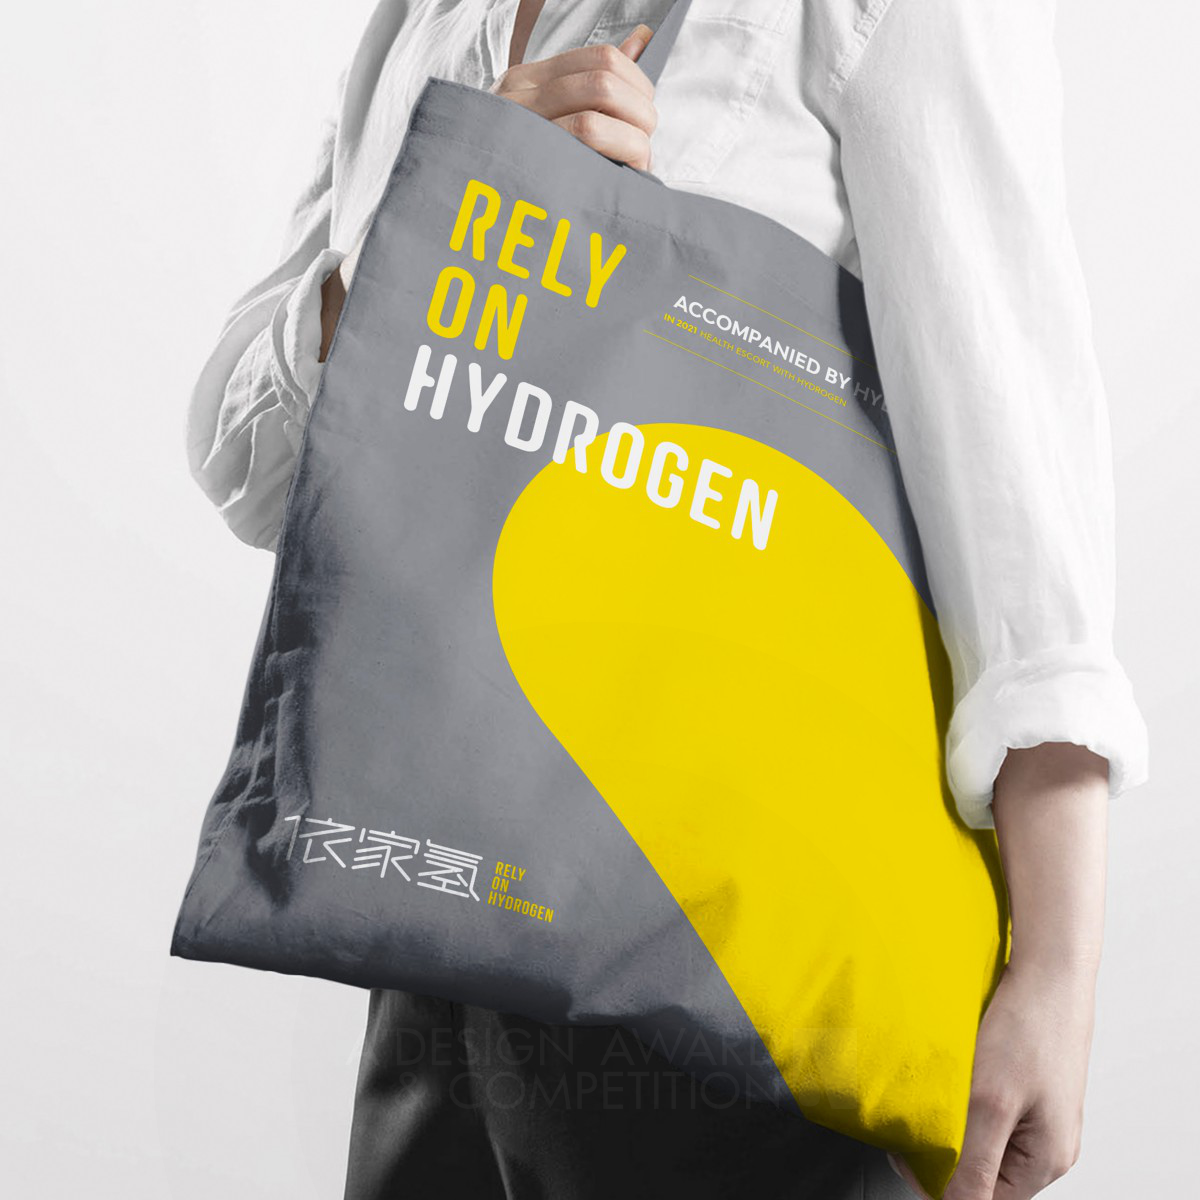 Rely on Hydrogen Corporate Identity by Guangzhou Cheung Ying Design Co. Ltd. Bronze Graphics, Illustration and Visual Communication Design Award Winner 2022 